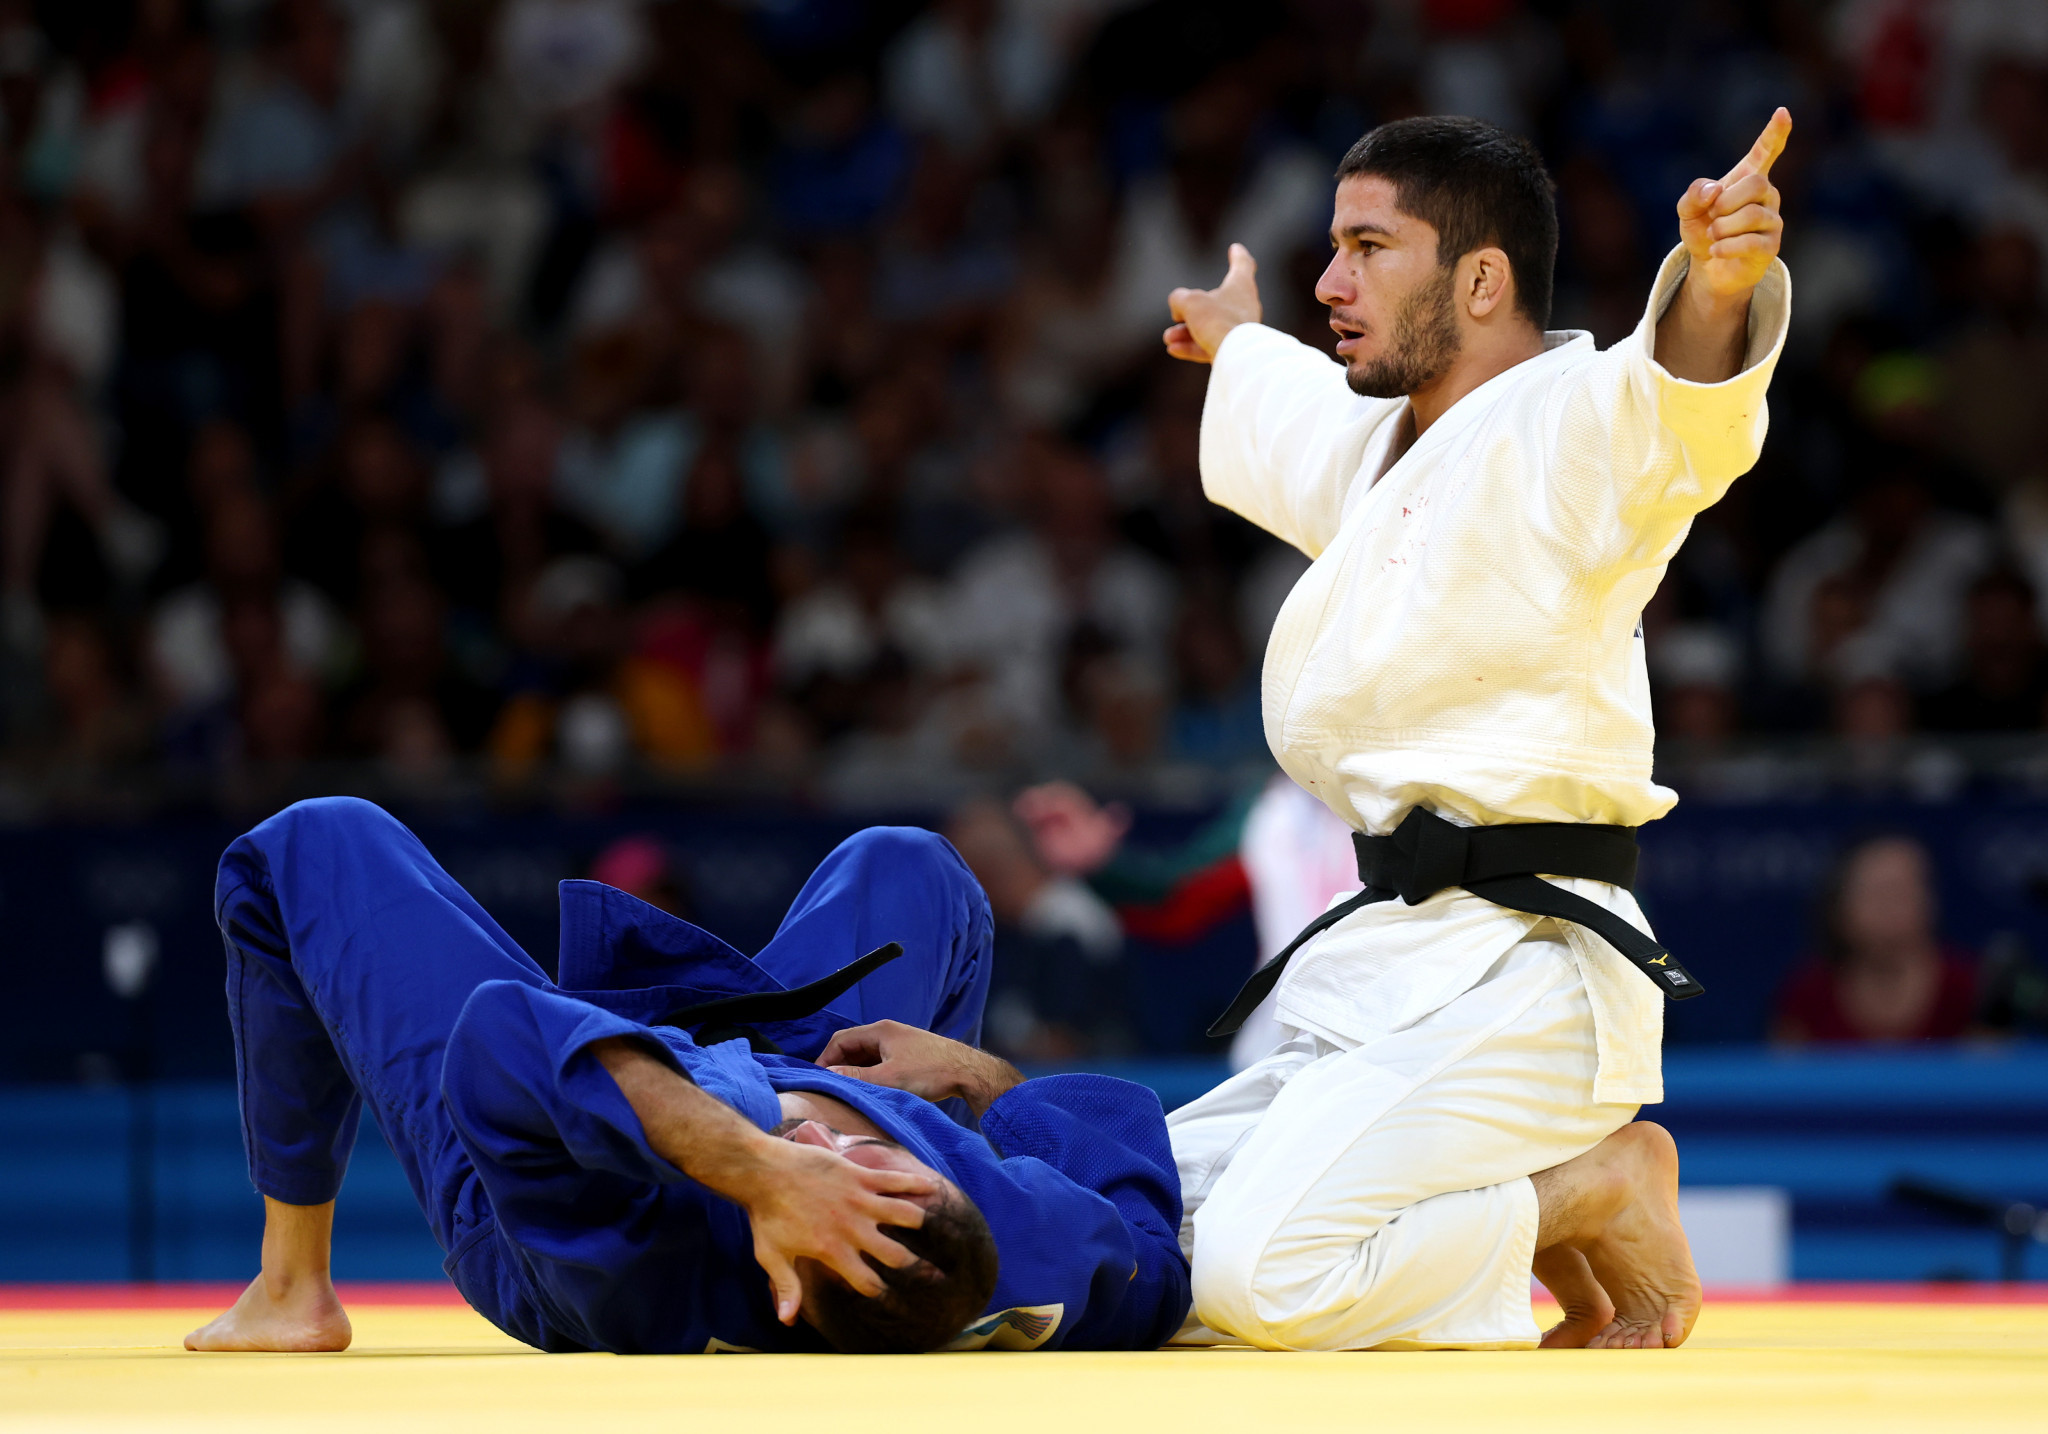 Nurali Emomali of Team Tajikistan and Baruch Shmailov of Team Israel at the Paris 2024 Olympic Games. GETTY IMAGES